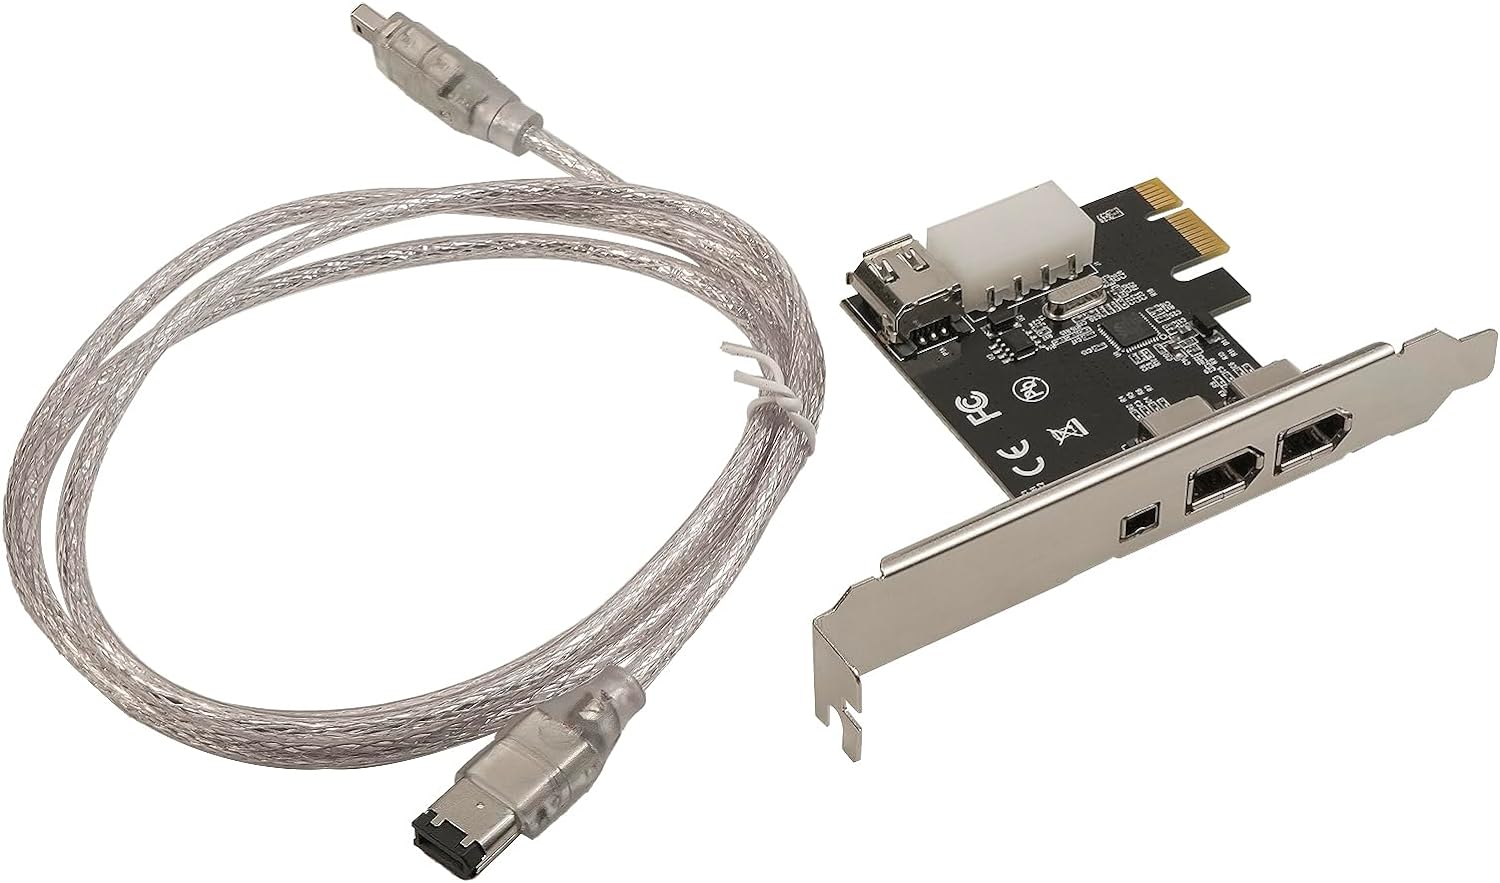 PCIe 4 Ports 1394A Firewire Expansion Card Fit for Desktop PCs,3X 6Pin and 1X 4Pin PCI Express Controller IEEE 1394A Firewire 400 Adapter with Low Profile Bracket and Cable